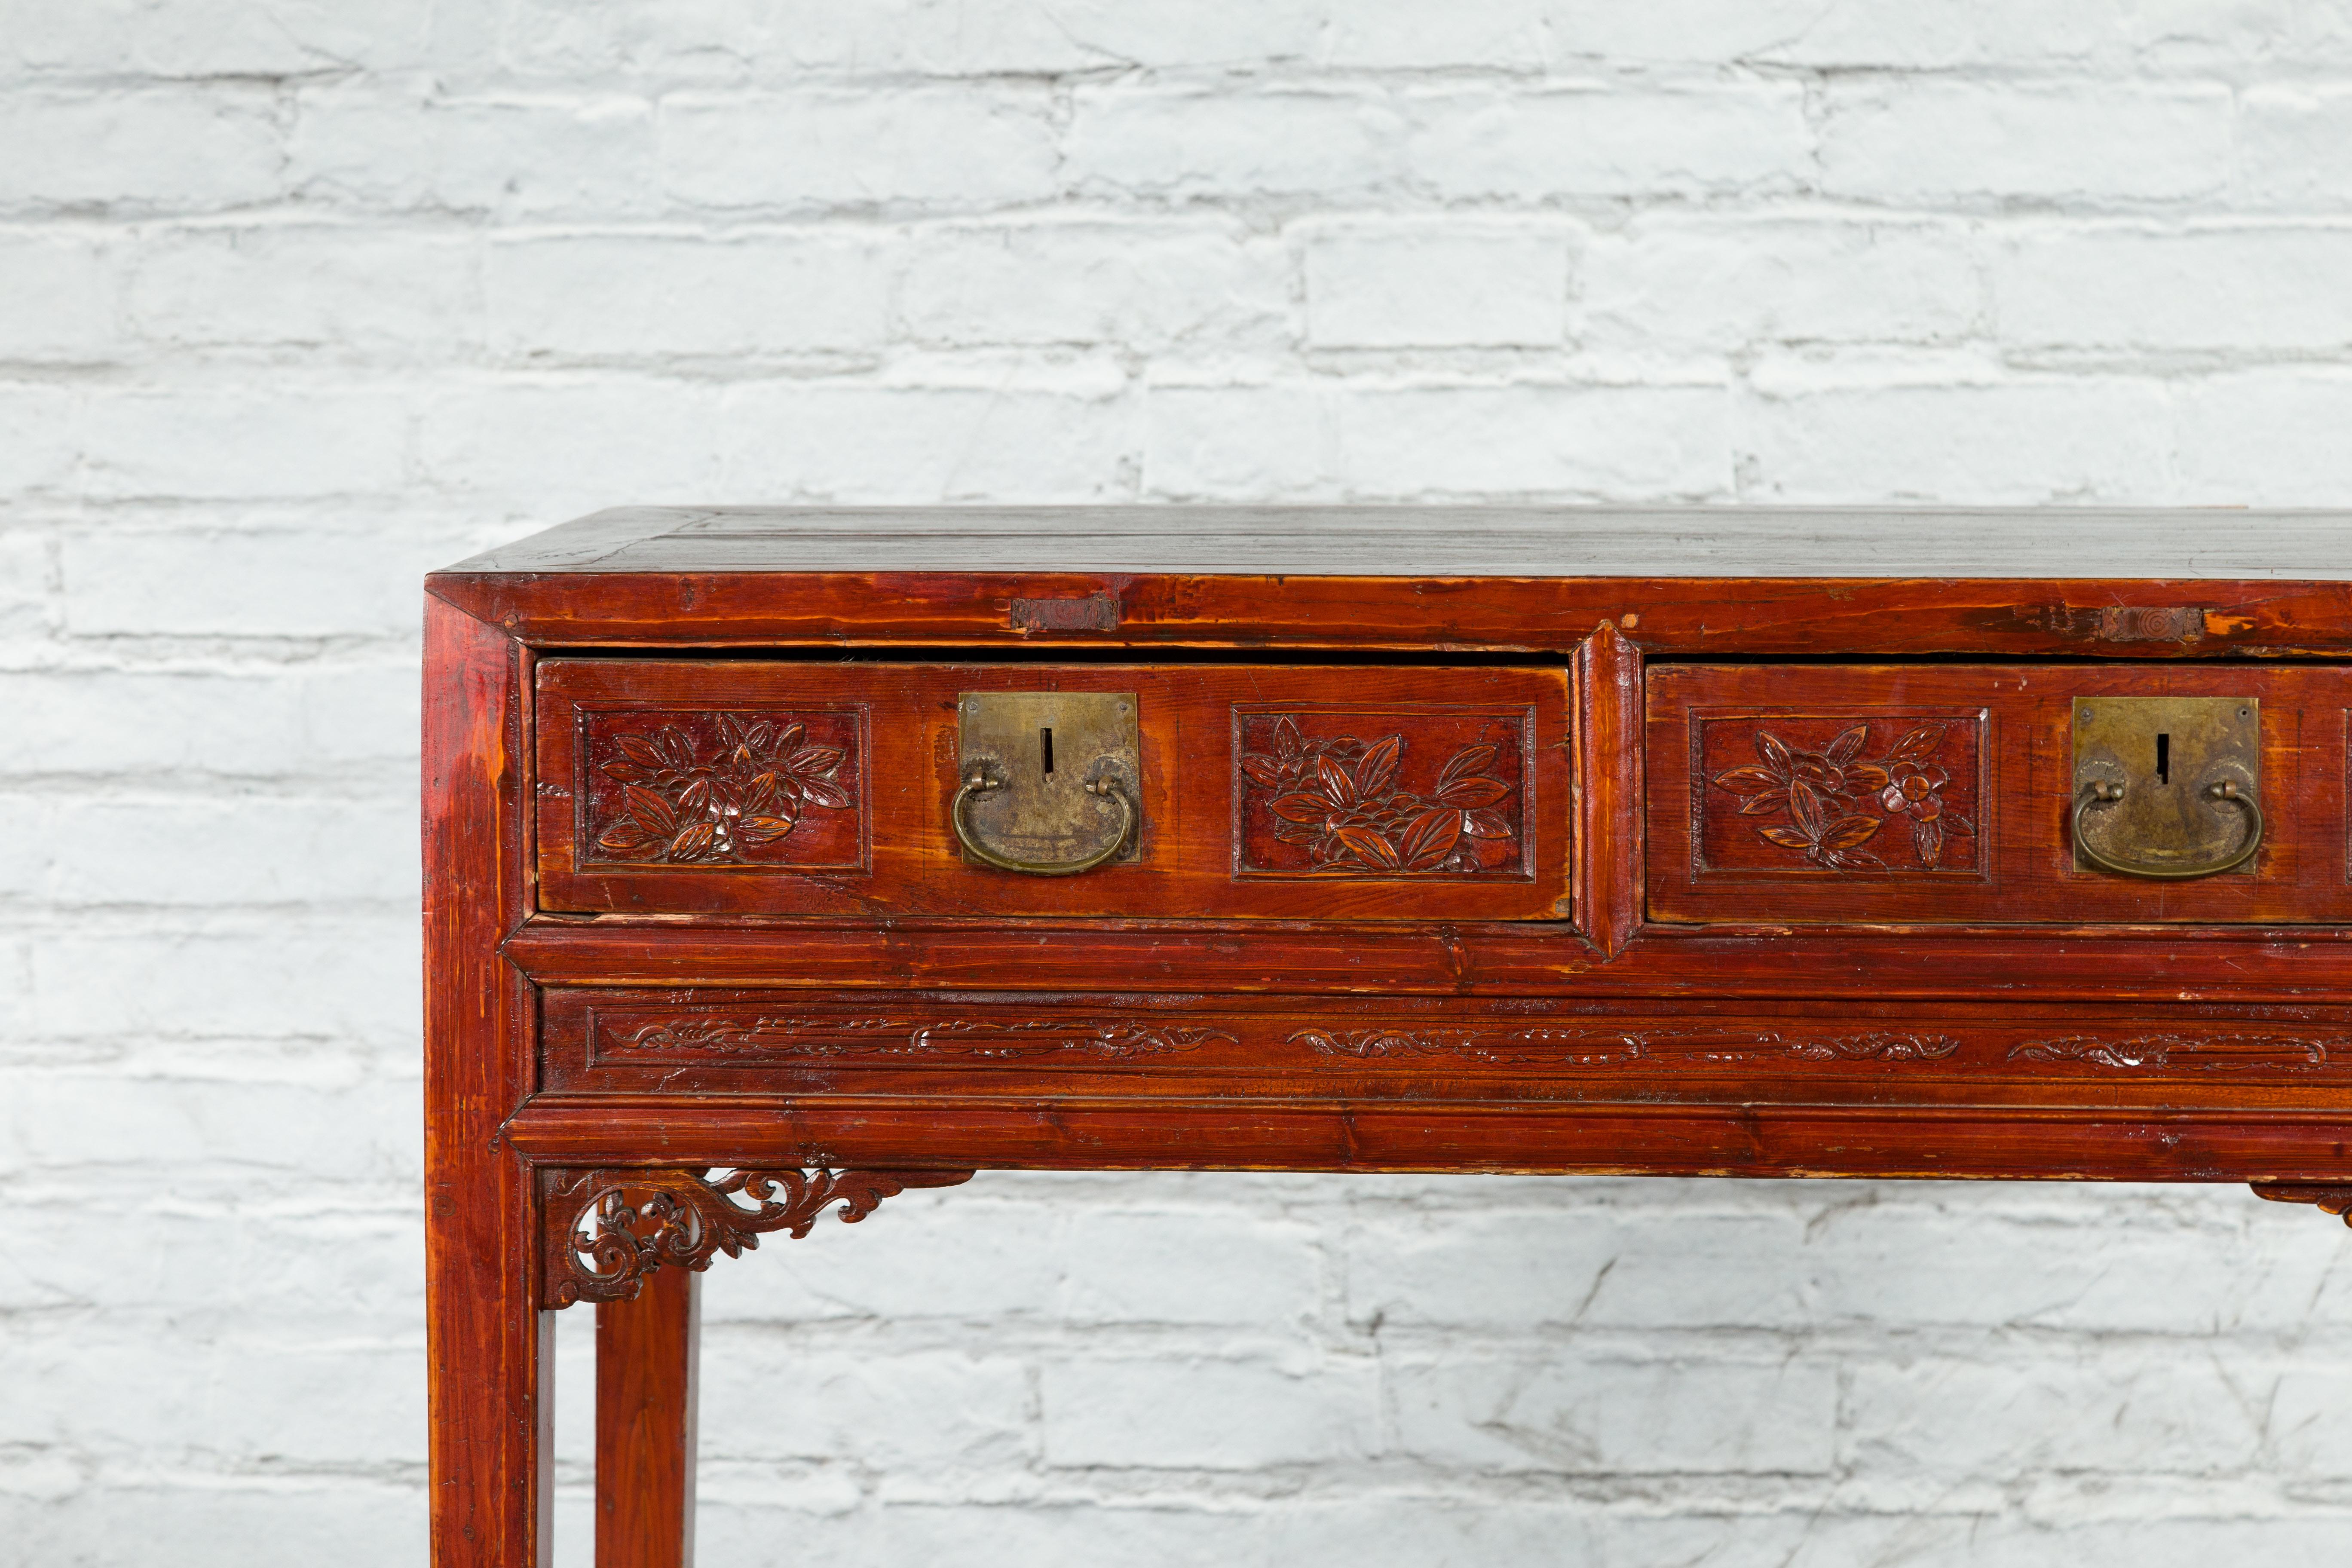 Chinese Qing Dynasty Period 19th Century Reddish Brown Table with Two Drawers In Good Condition For Sale In Yonkers, NY